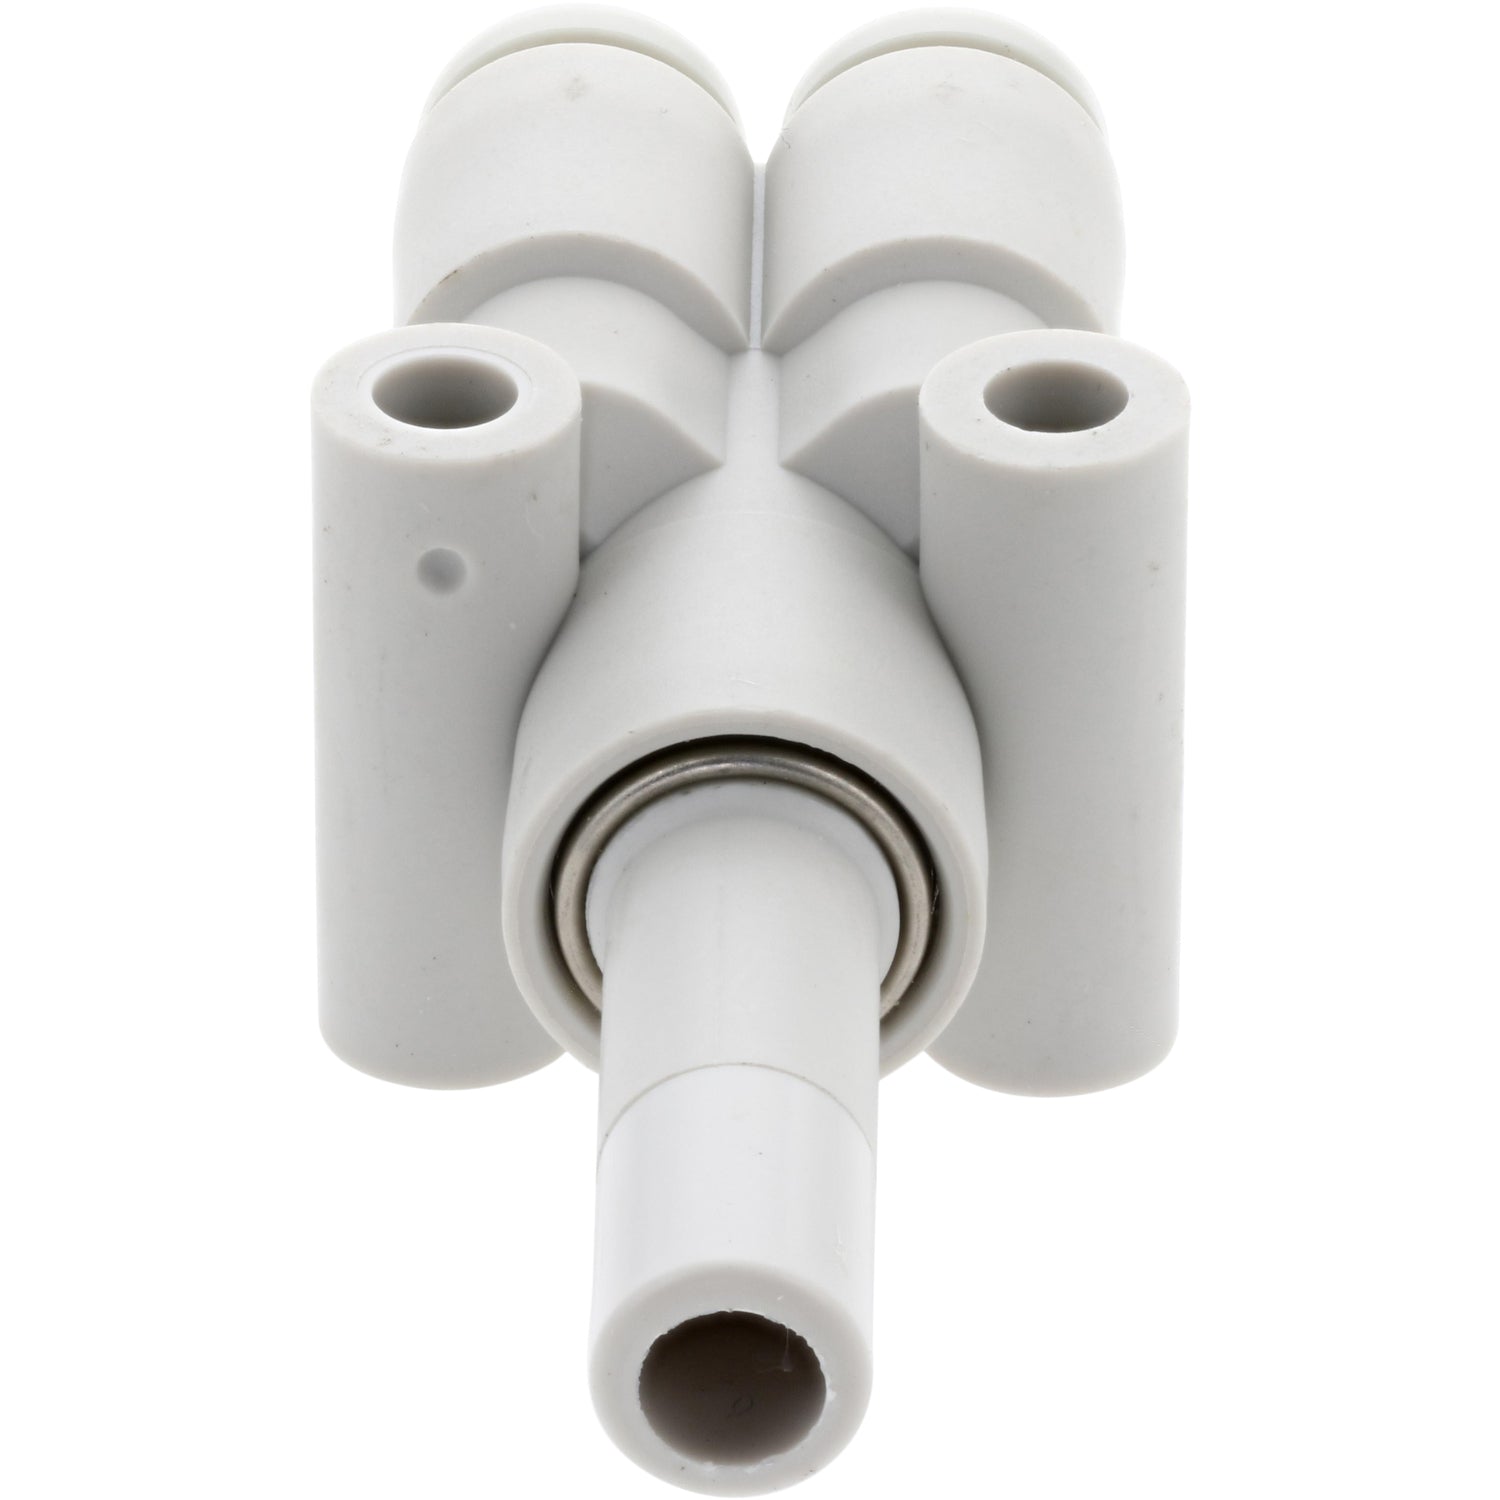 White plastic push-in quad-connector with white collars on white background.